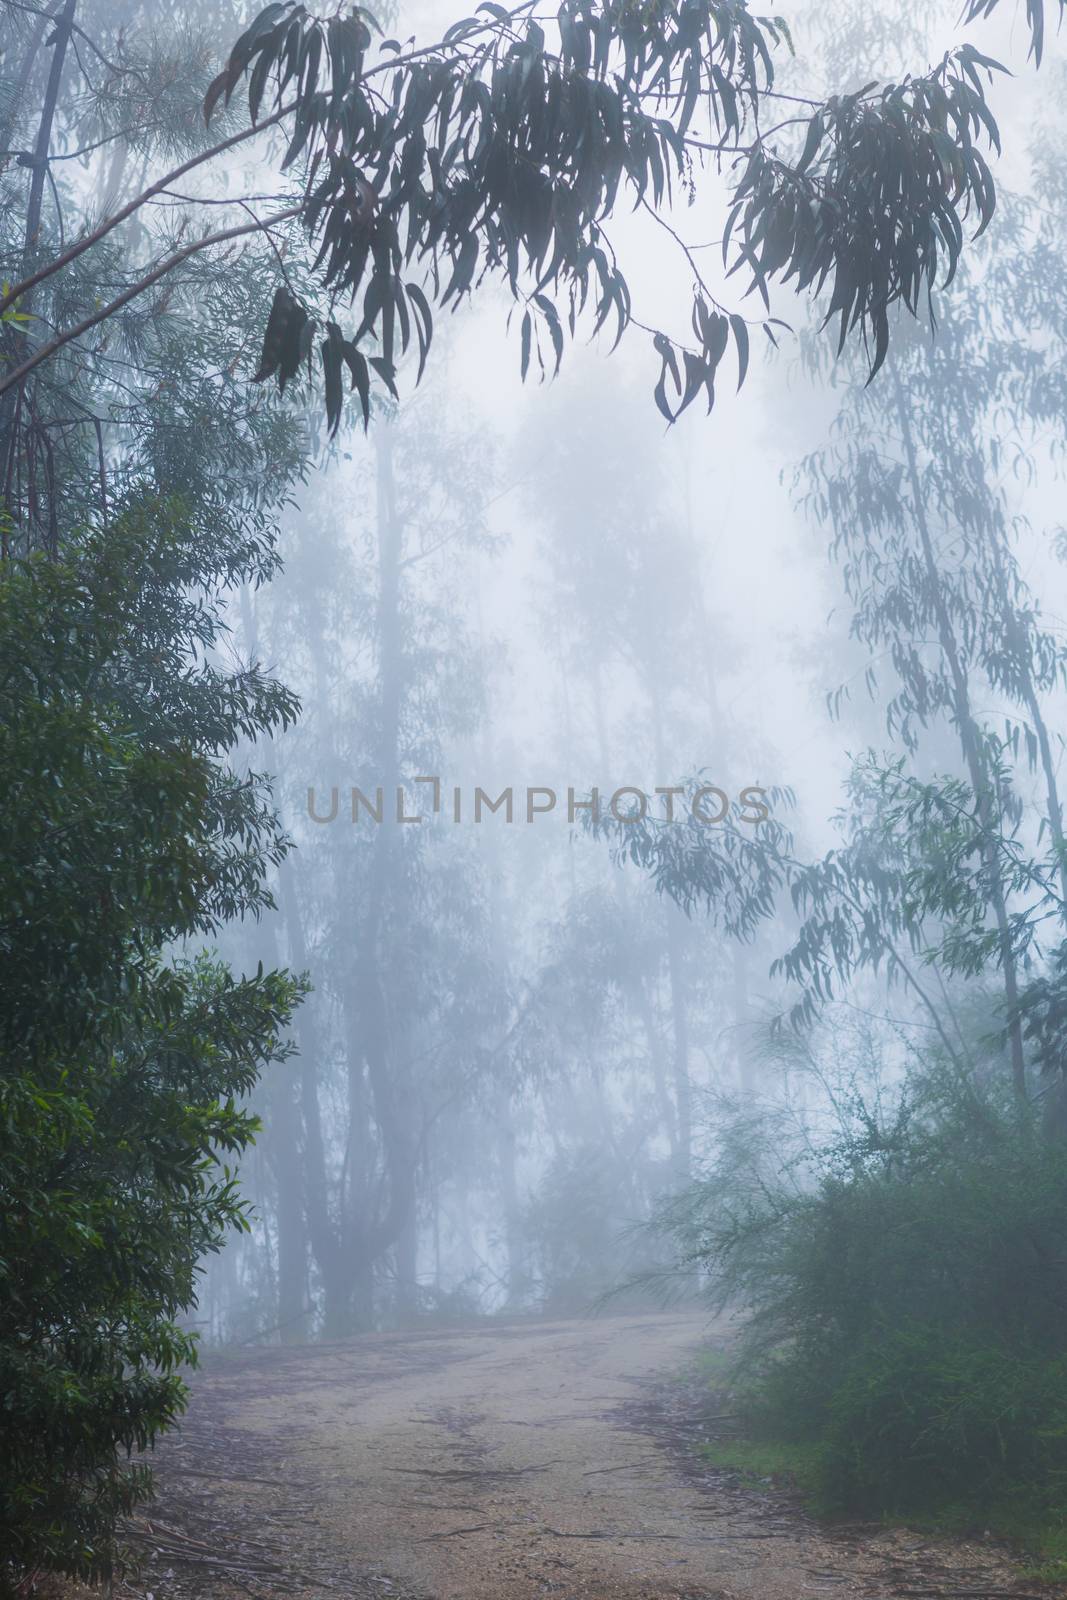 Fog in the forest at the portuguese national park, Geres, Portugal